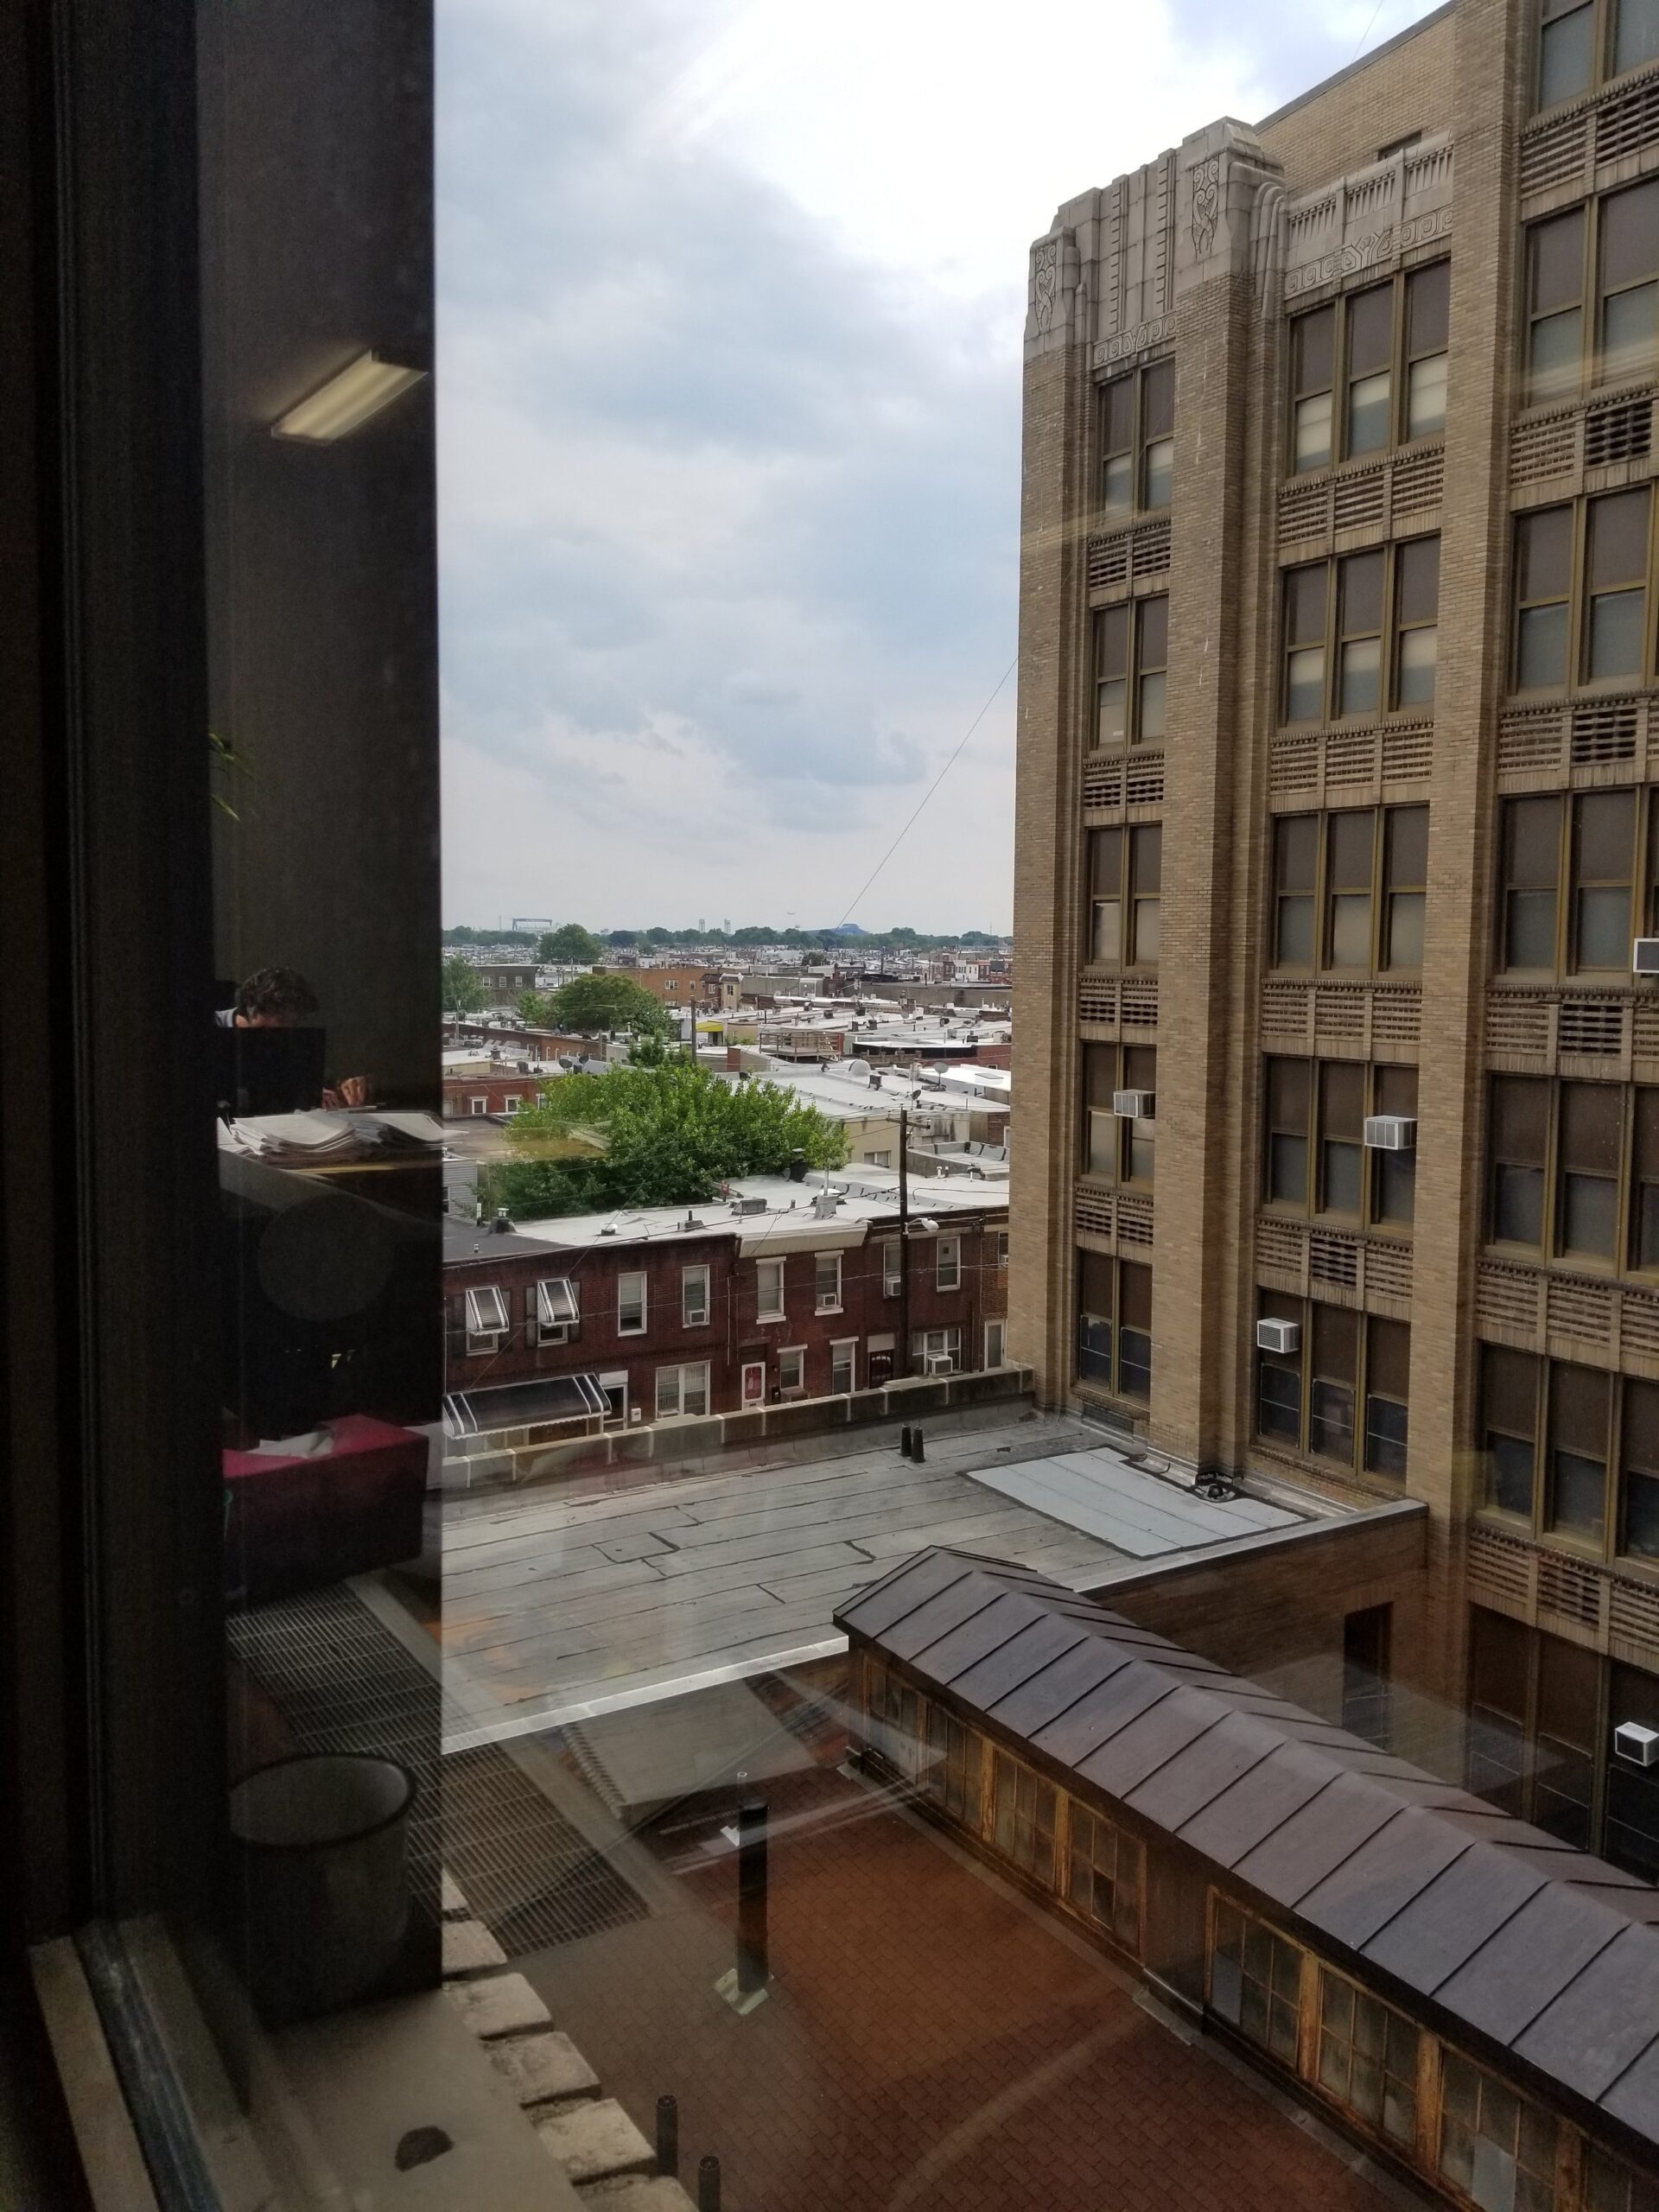 Peeking out over the old boiler room to the South Philly skyline.